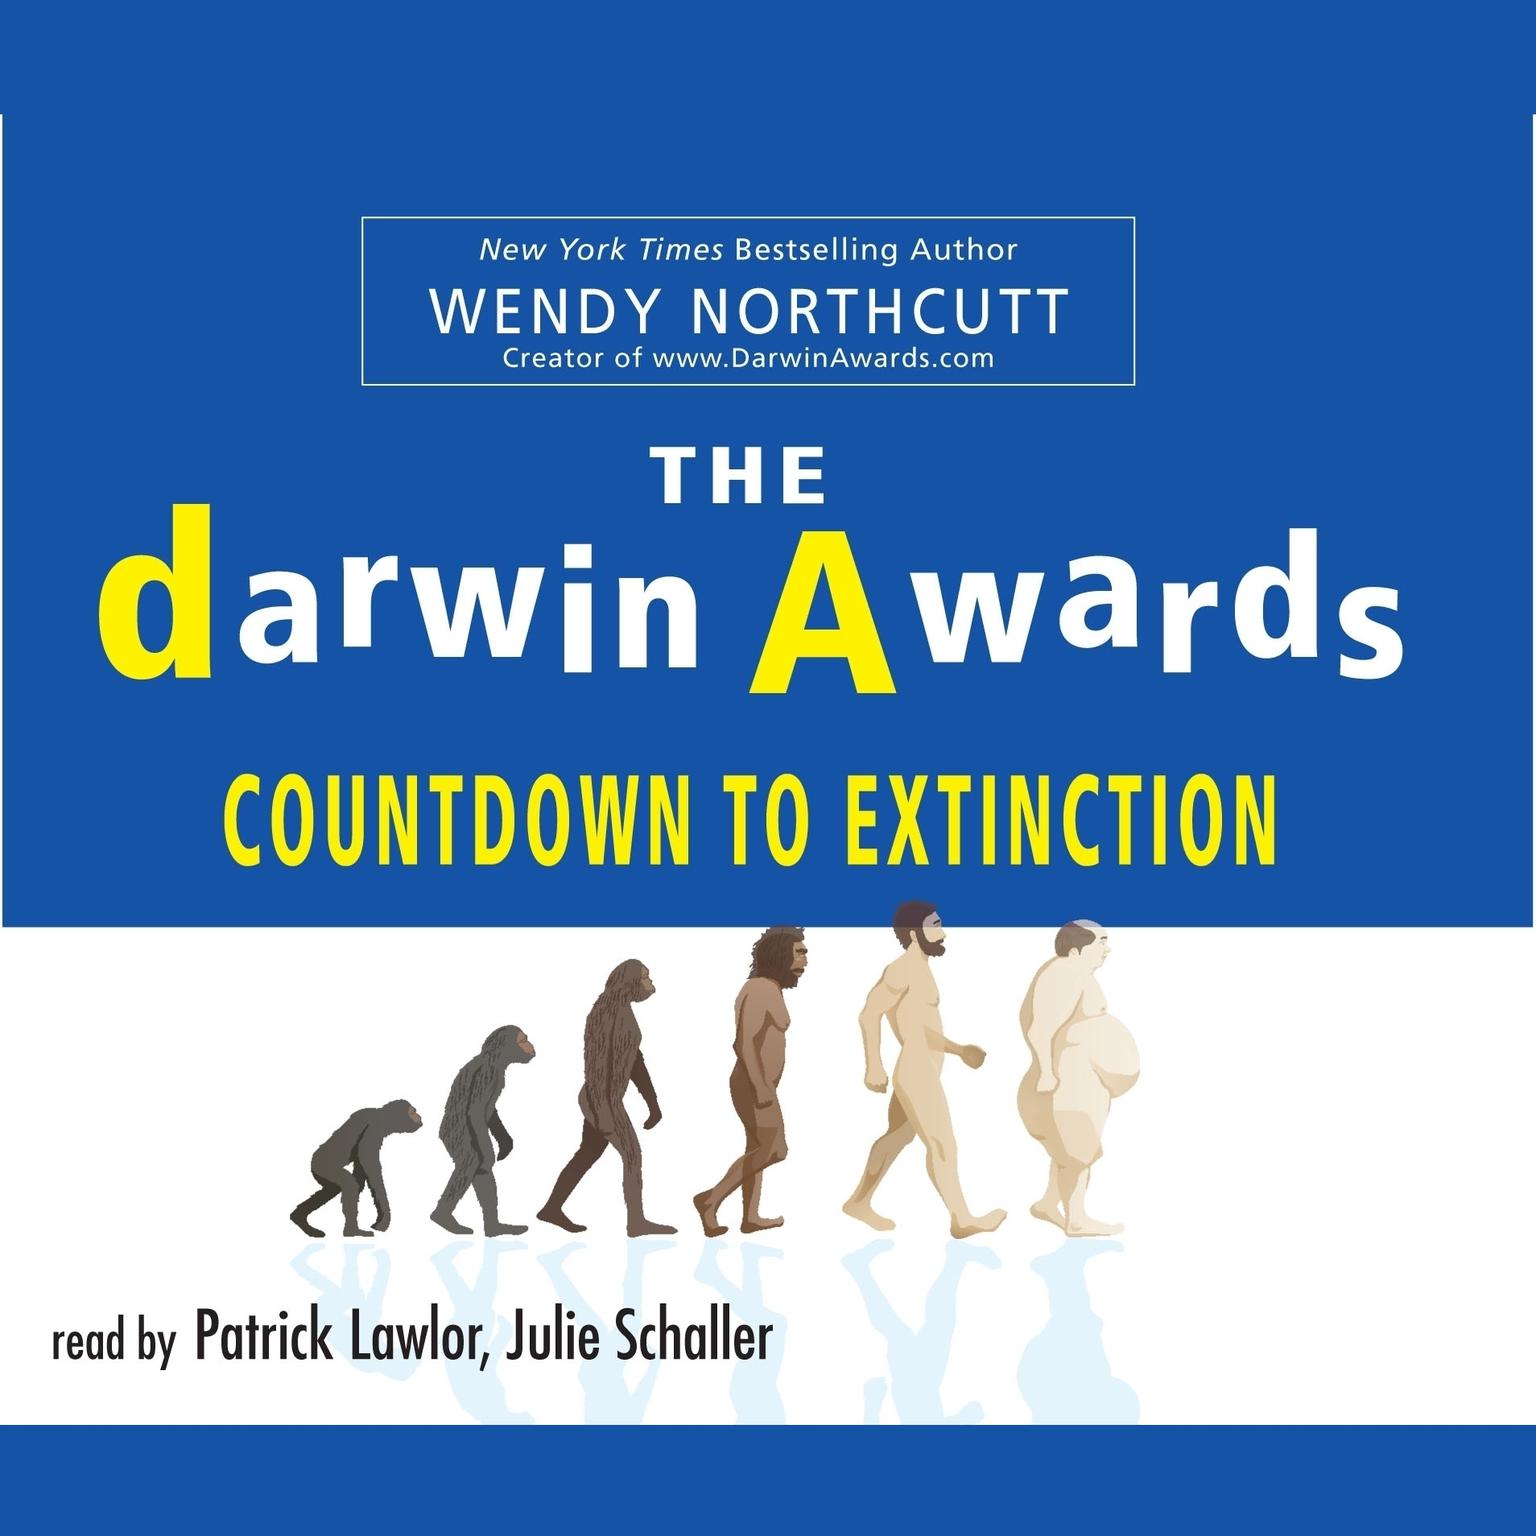 The Darwin Awards Countdown to Extinction (Abridged) Audiobook, by Wendy Northcutt